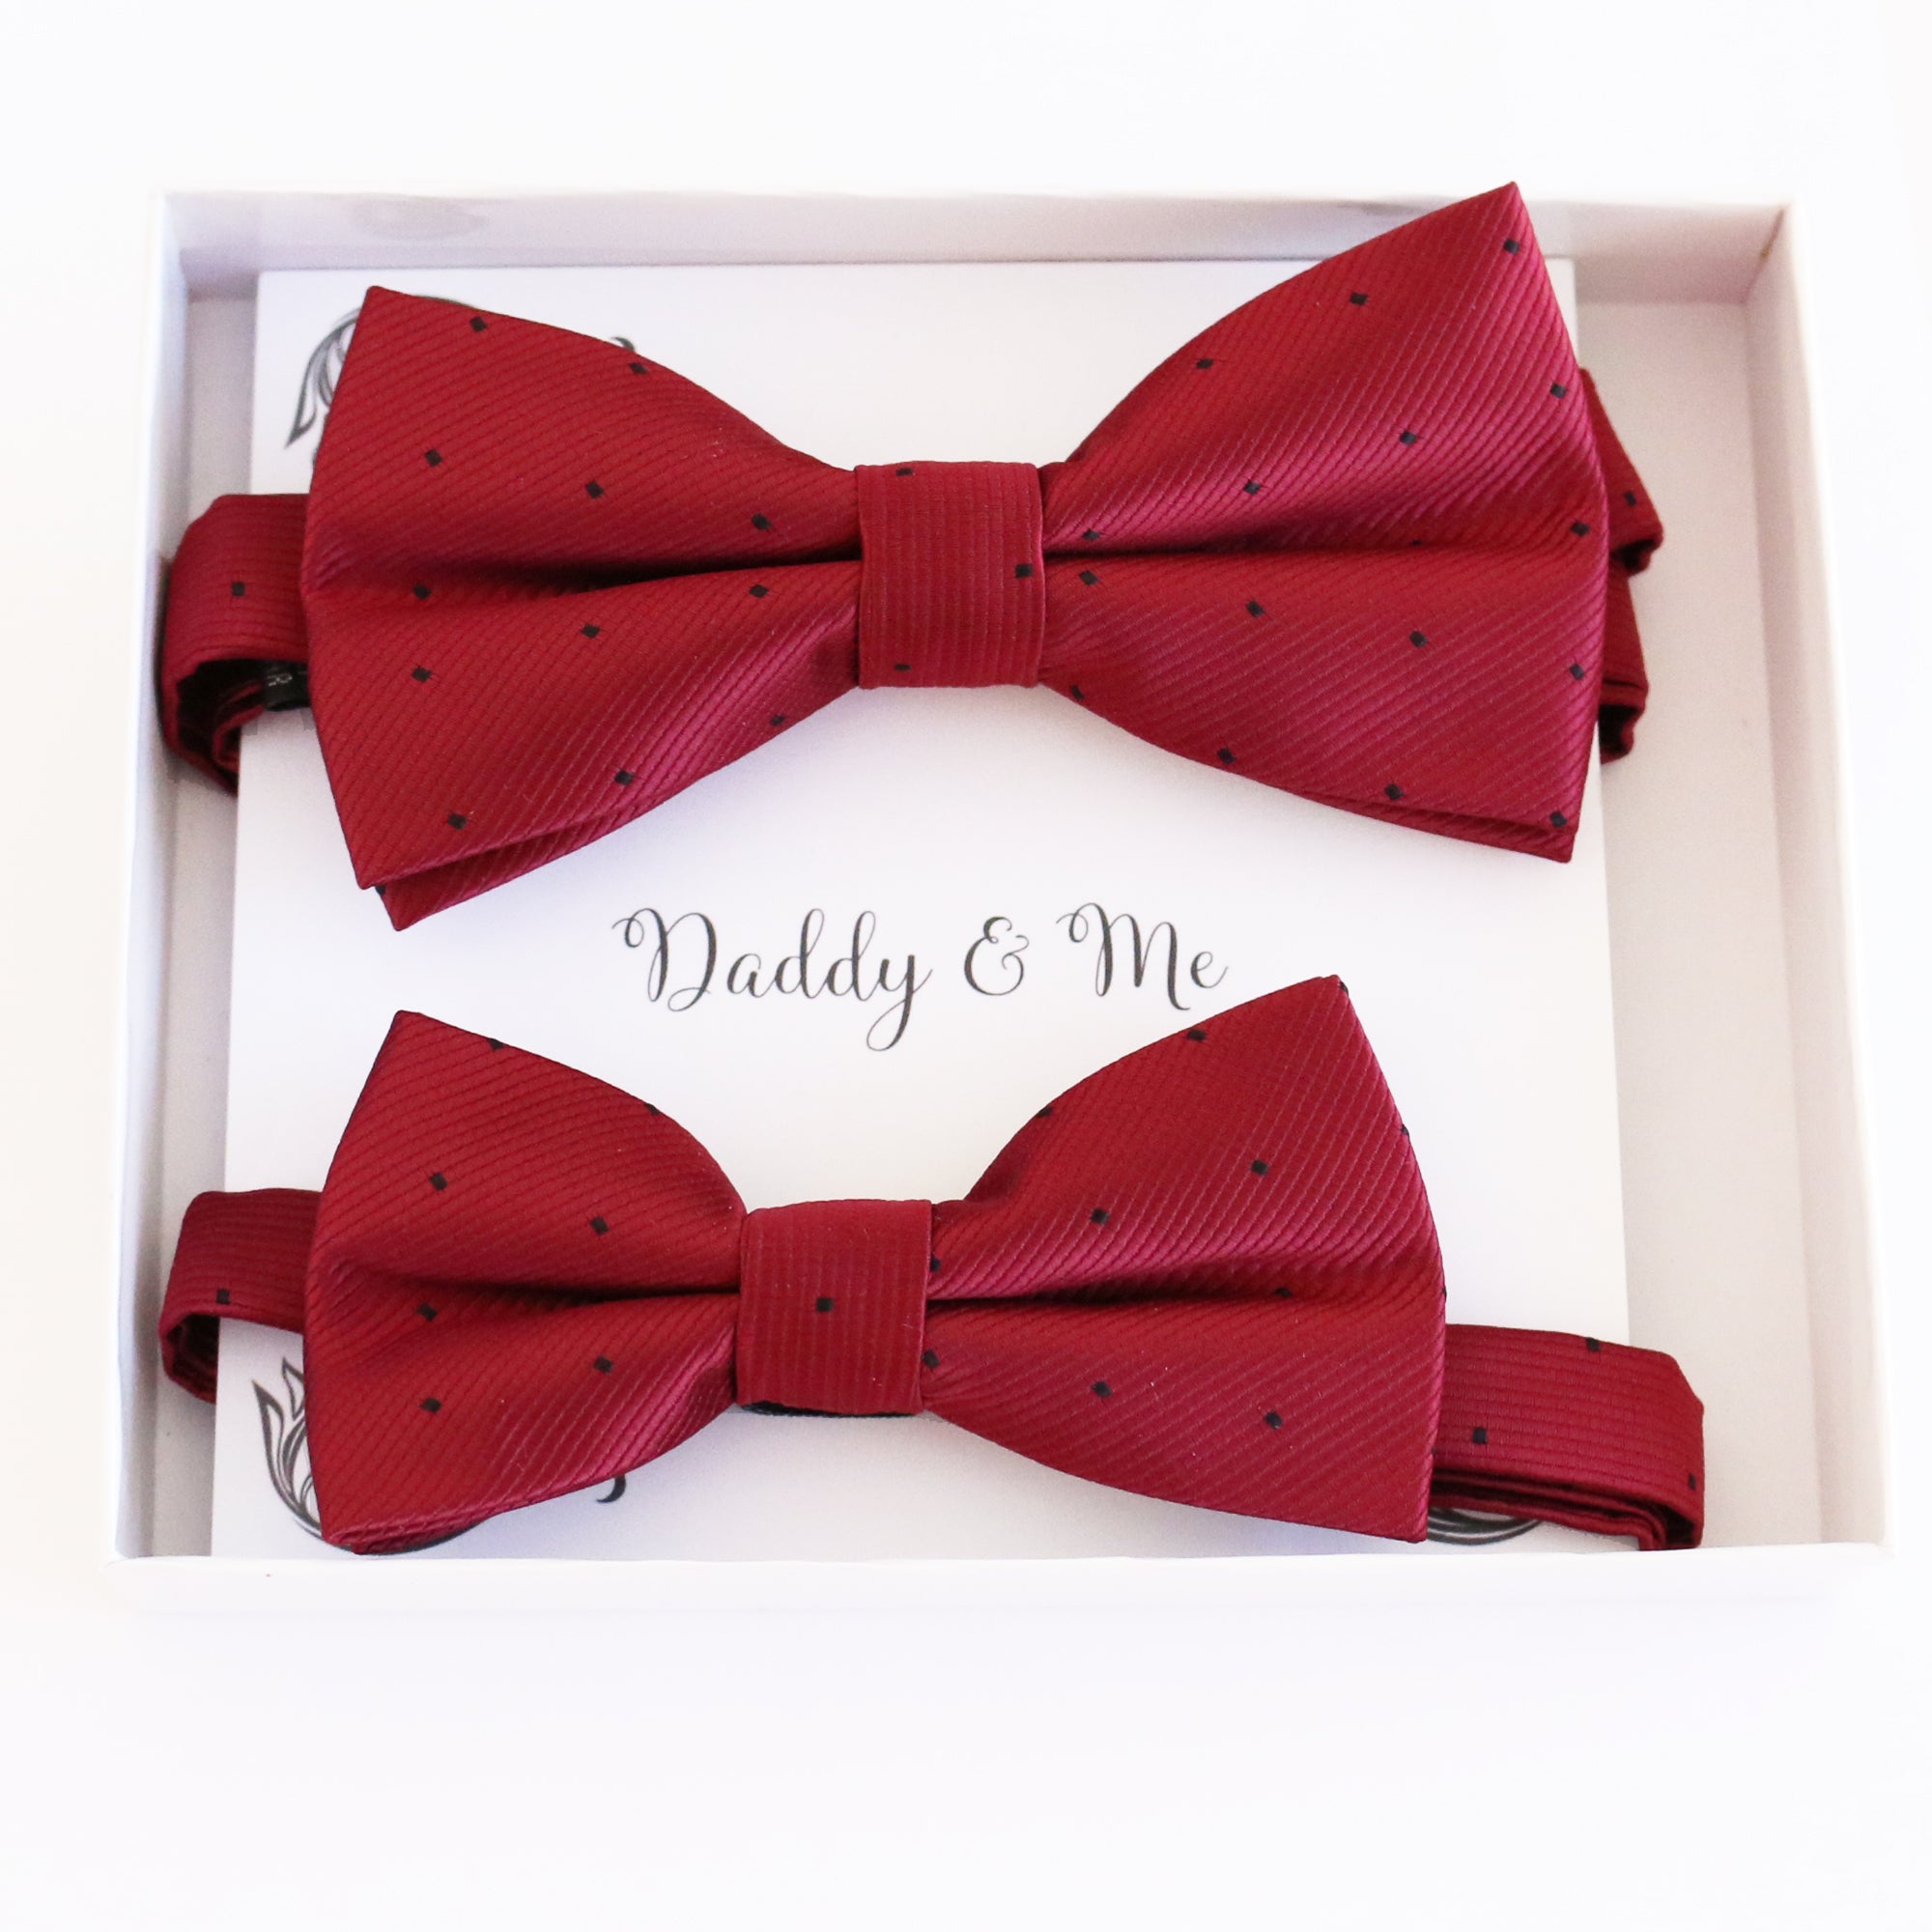 Red Bow tie set for daddy son Daddy me gift set Father son match daddy me bow Handmade kids bow Adjustable pre tied bow, High quality